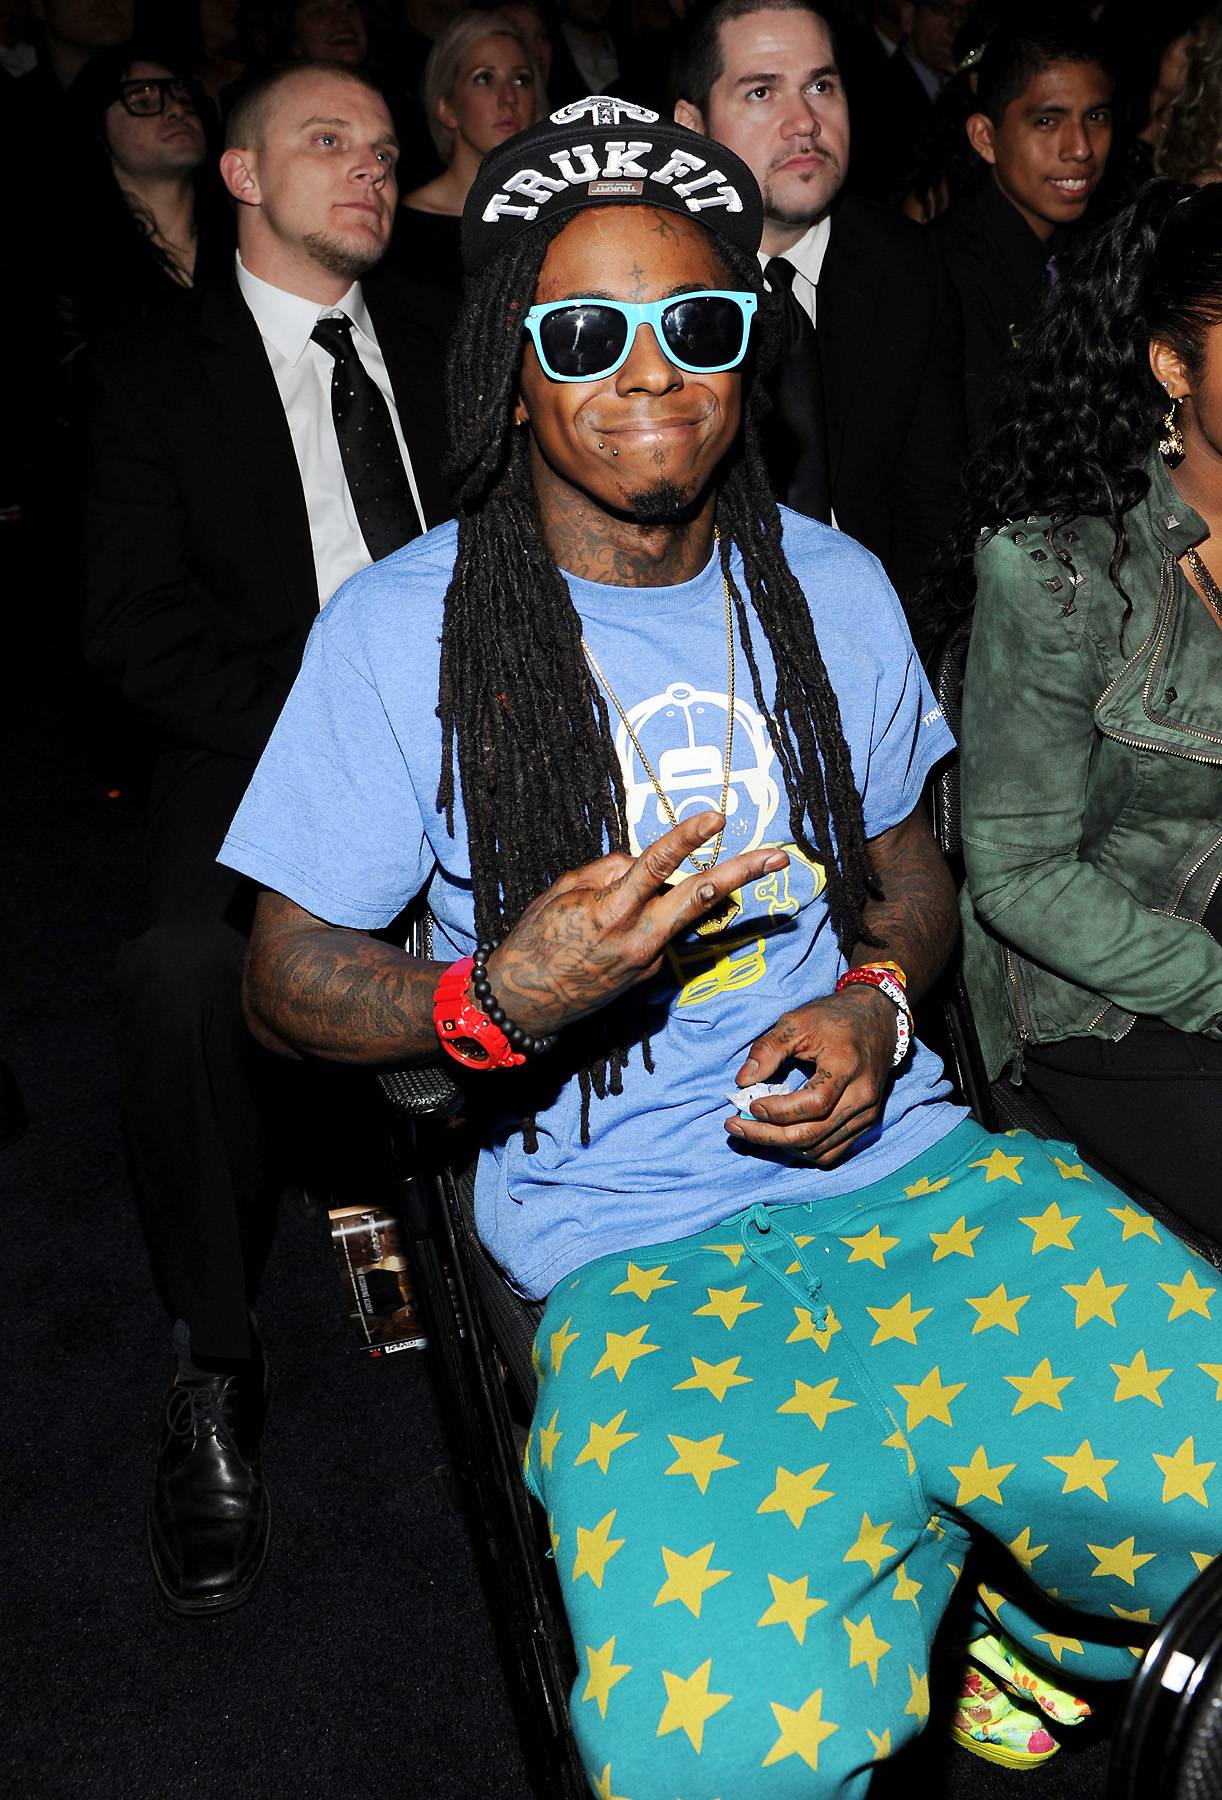 Quirk-star - Lil Wayne sports a colorful ensemble that looks almost like pajamas at the the 54th Annual Grammy Awards held at the Staples Center in Los Angeles. Though Weezy was nominated for three Grammy Awards, he went home empty-handed. (Photo: Larry Busacca/Getty Images)